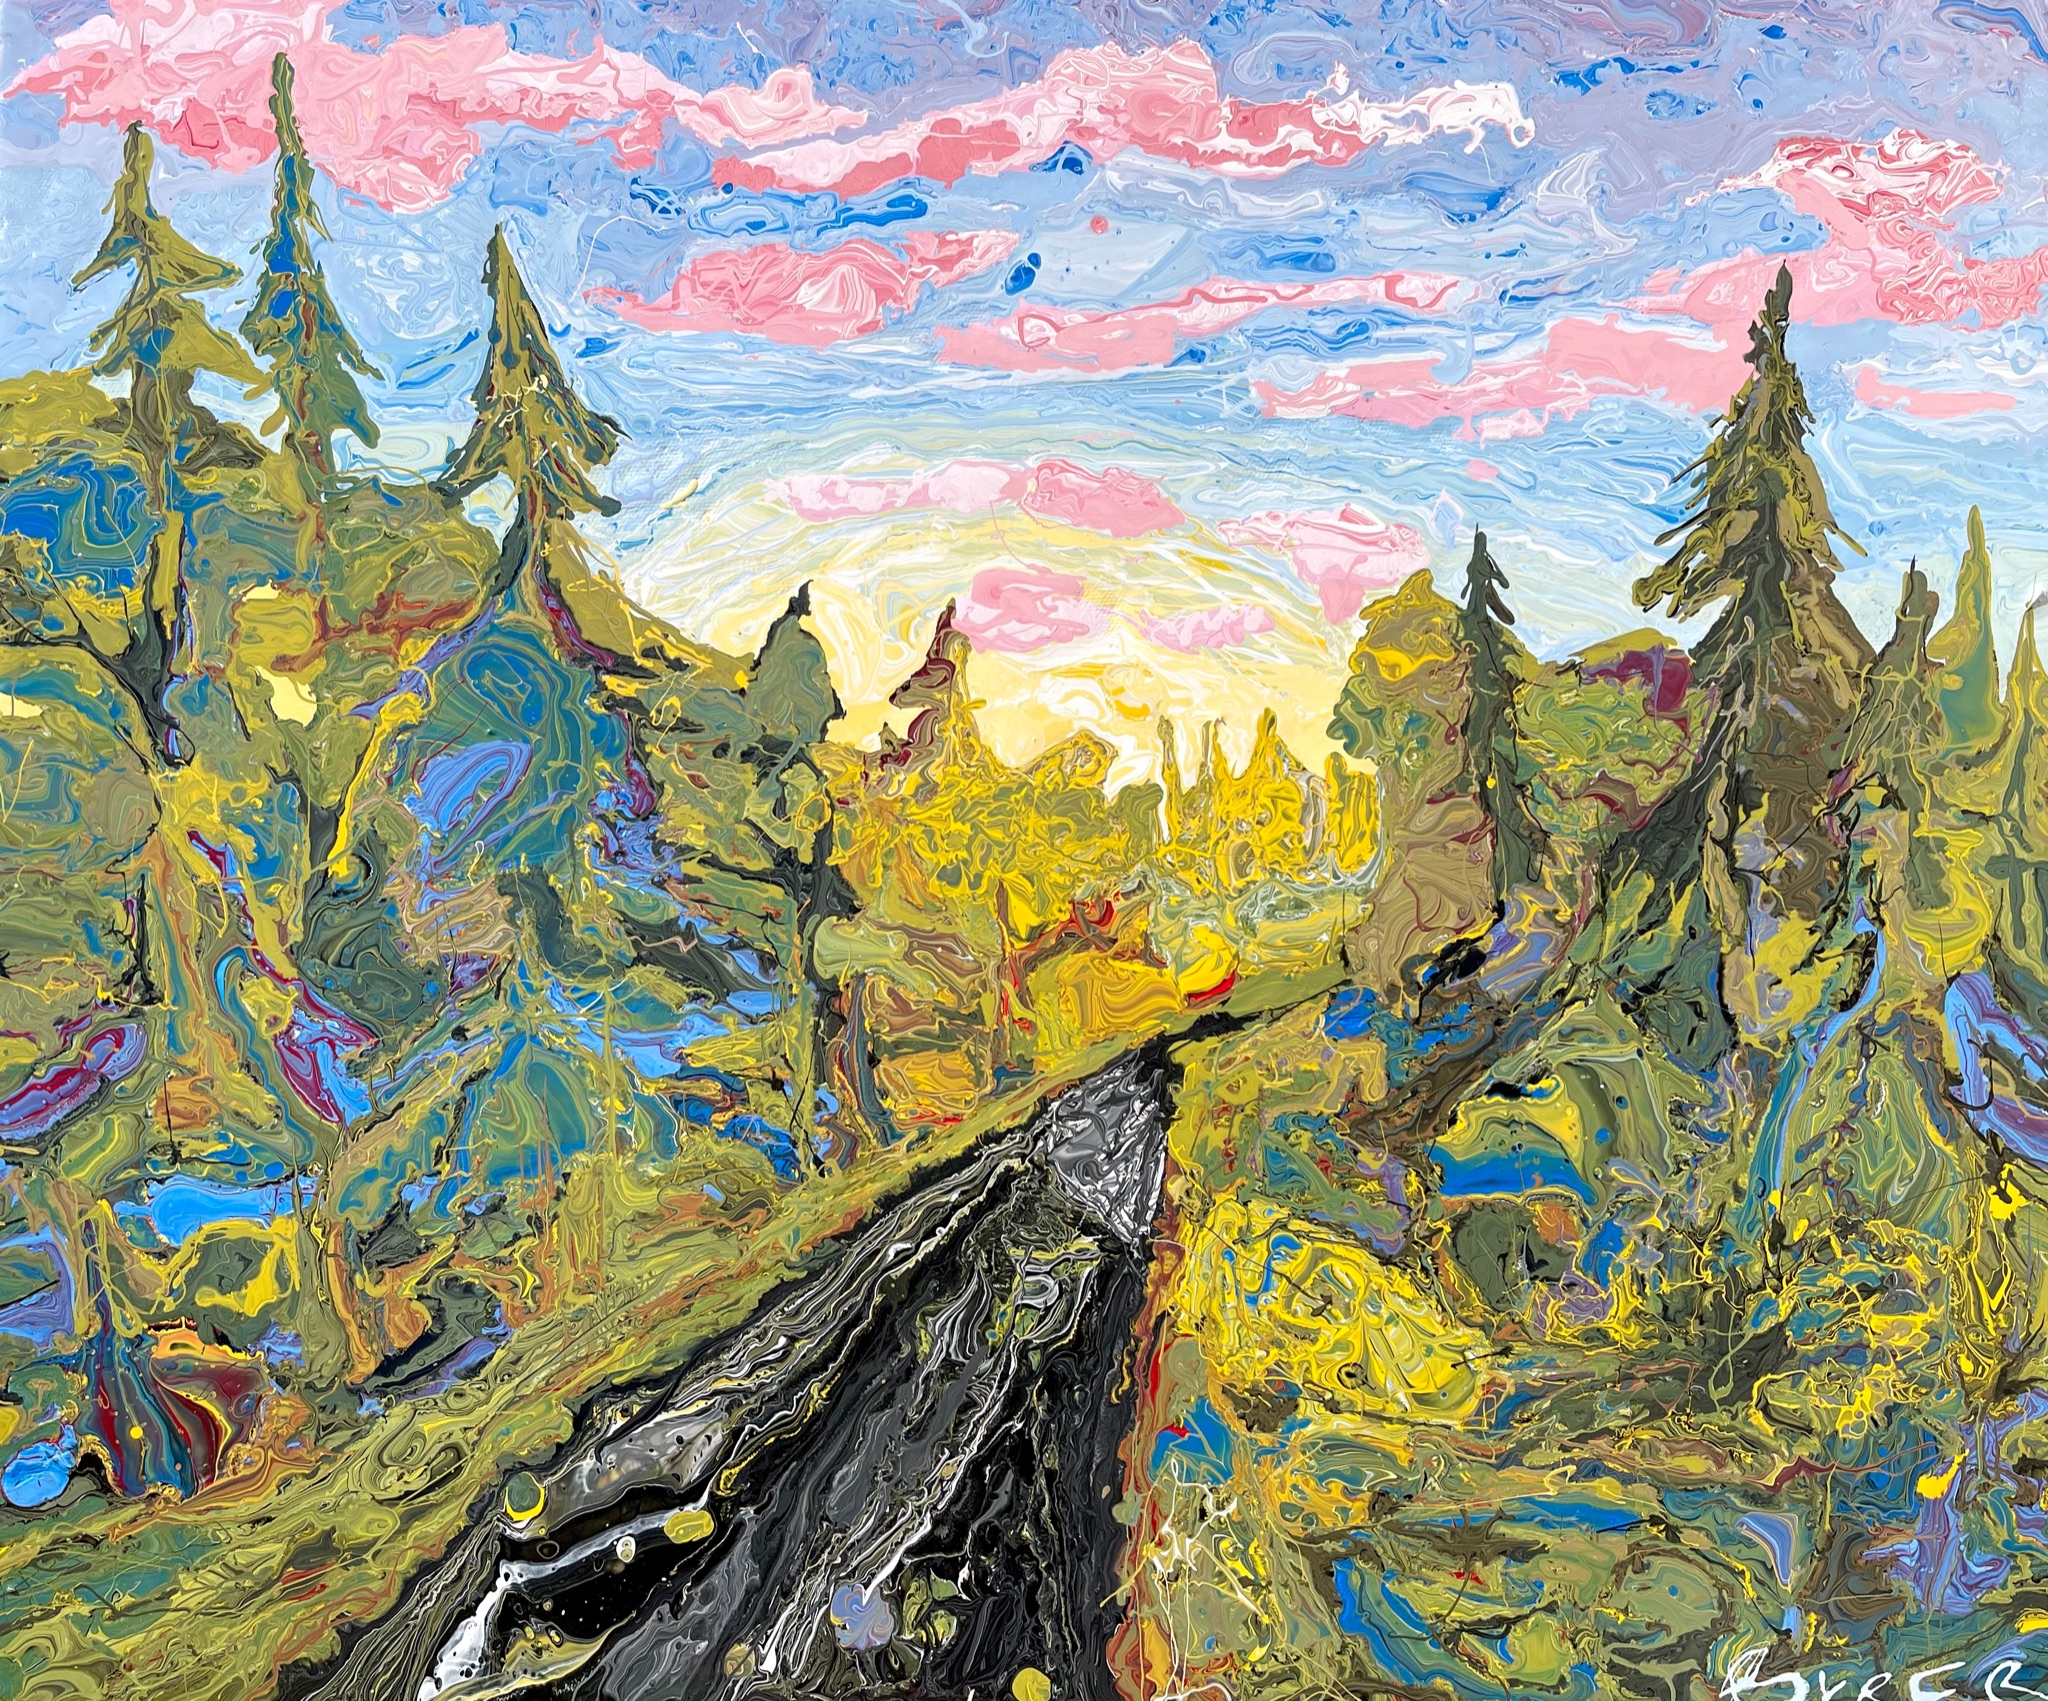 Fantastic, painting of a road through a forest with a blue and pink sky, by Jon Byrer